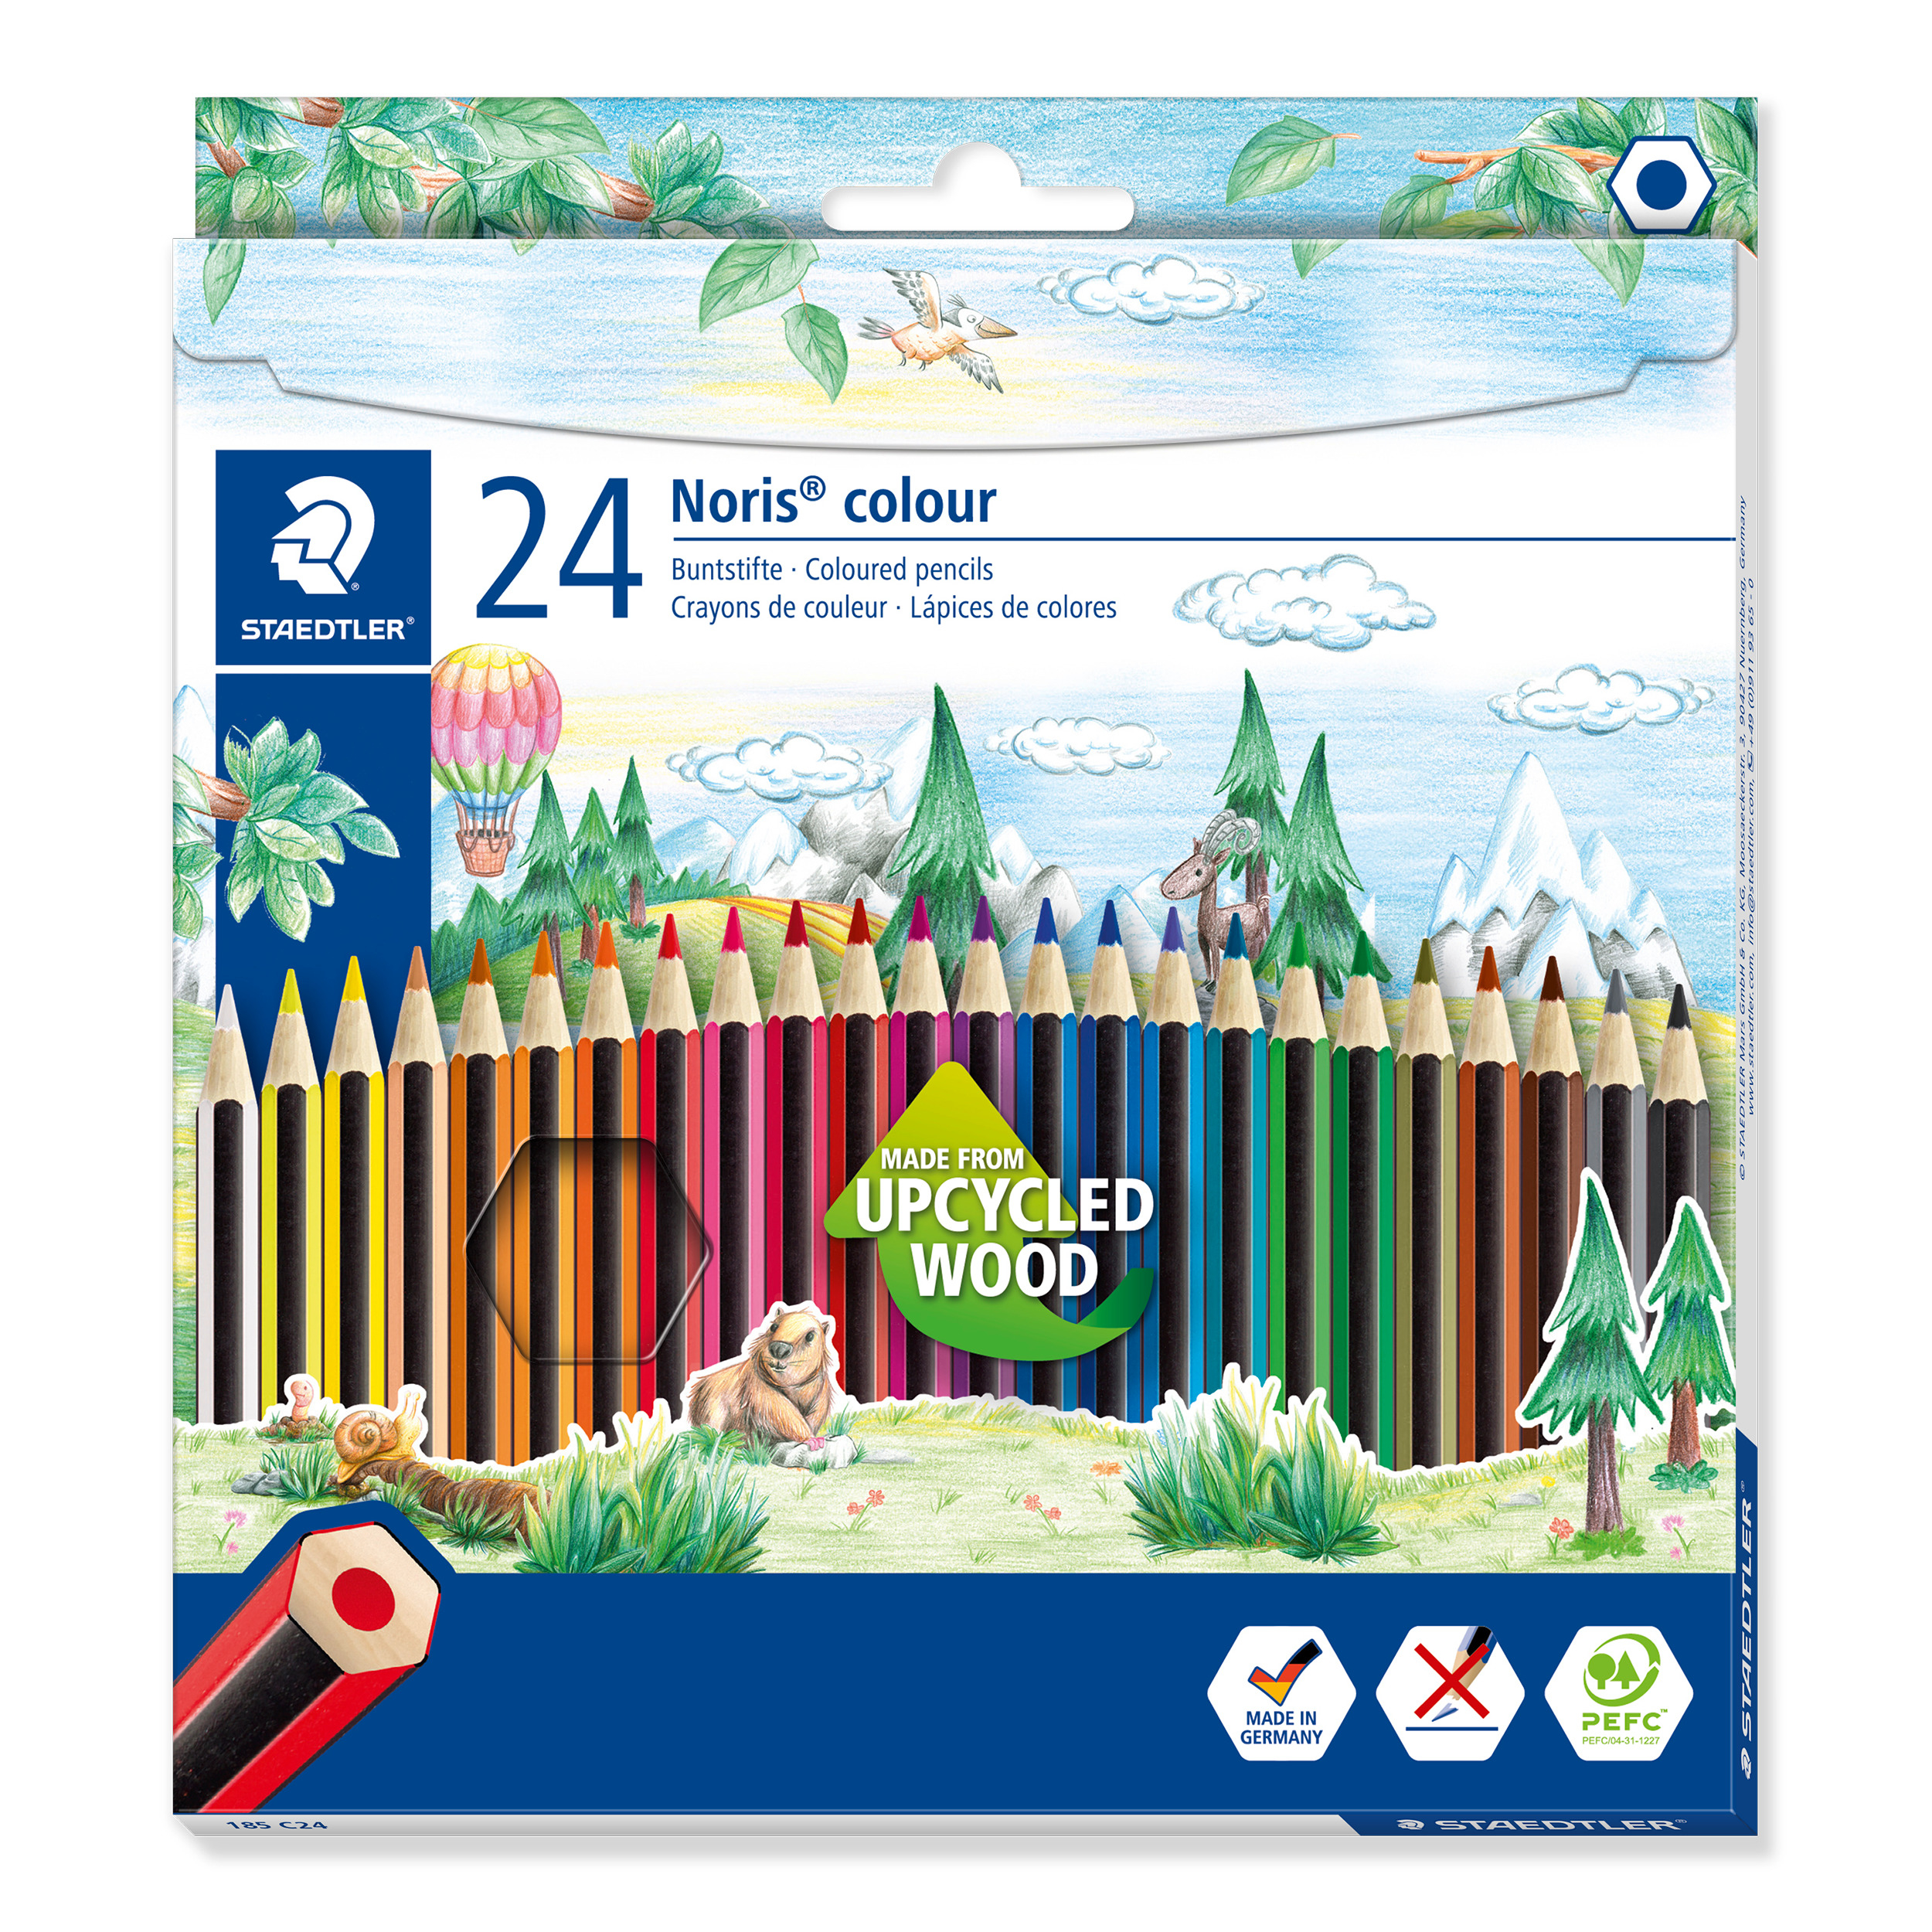 STAEDTLER Crayons couleur 185C24 upcycled Wood 24 pcs. upcycled Wood 24 pcs.